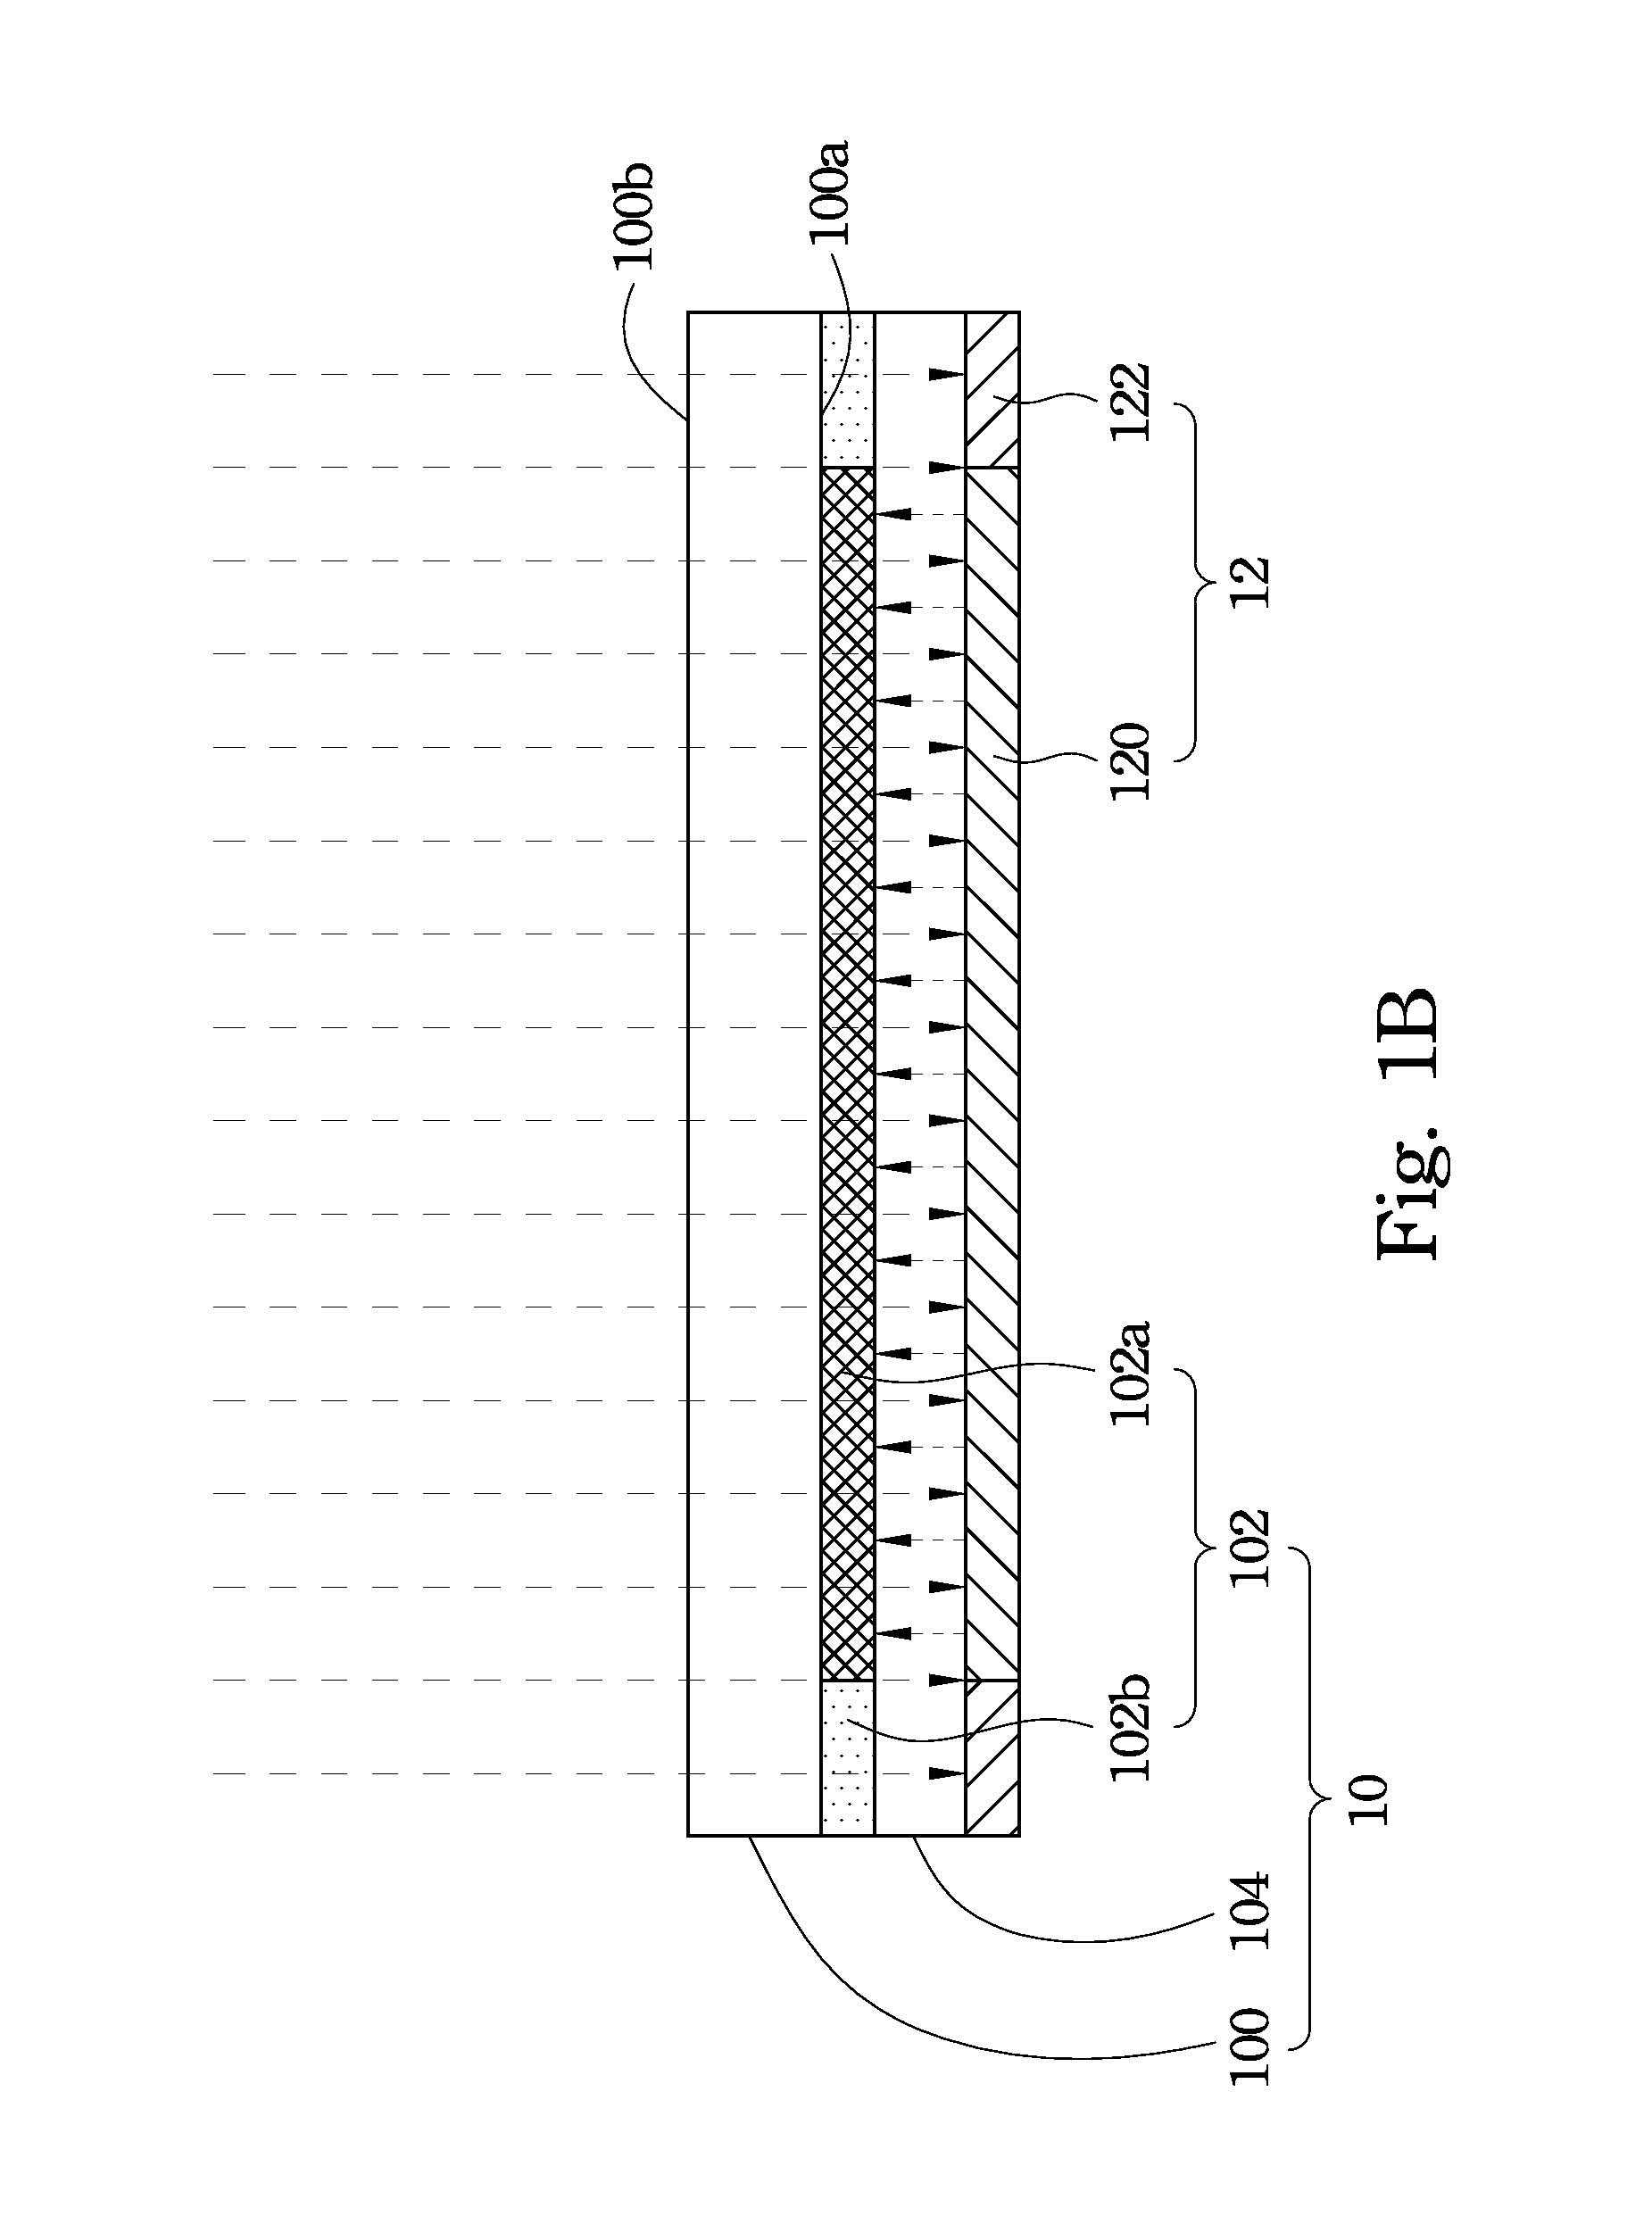 Substrate manufacturing method and multi-layer structure